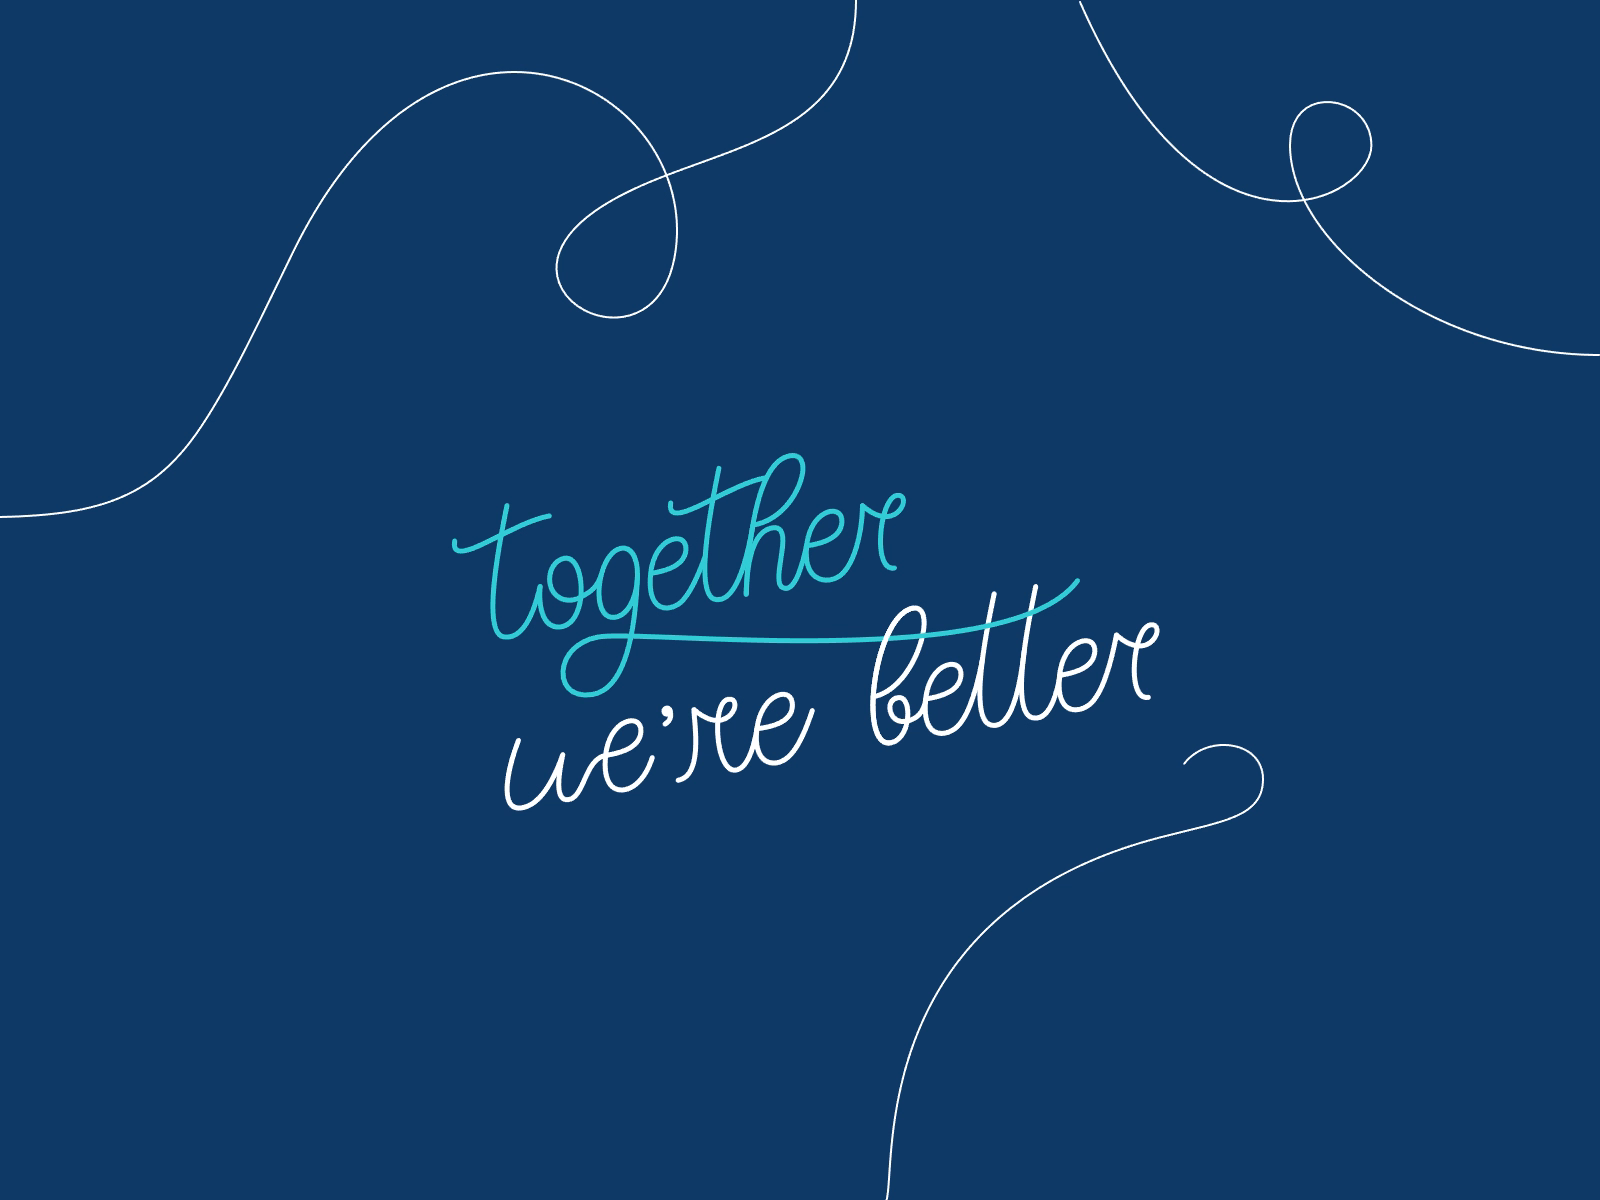 Together We're Better – Lettering Animation by Laura Ungrad on Dribbble